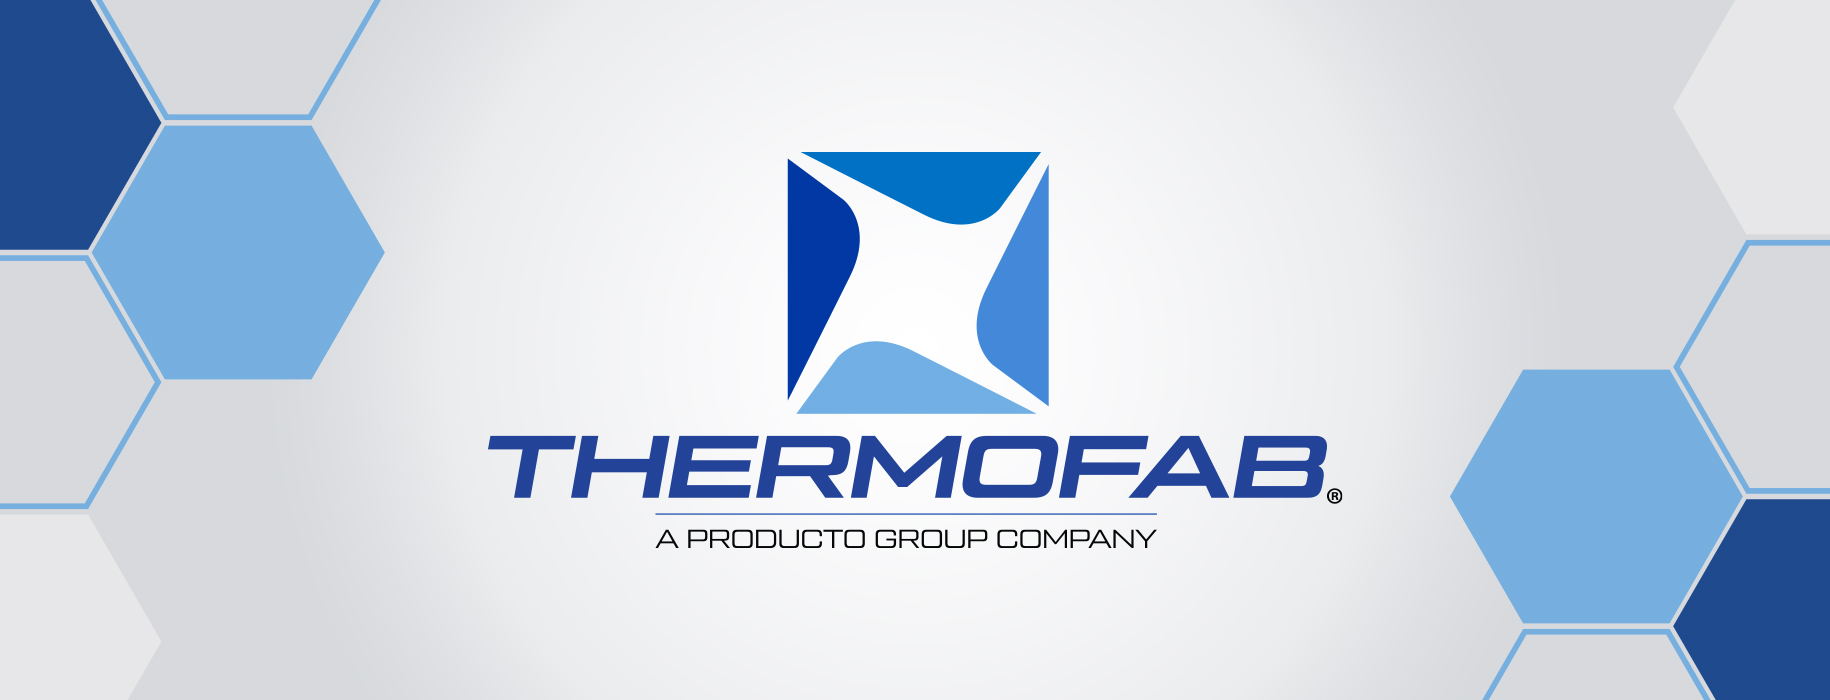 ThermoFab